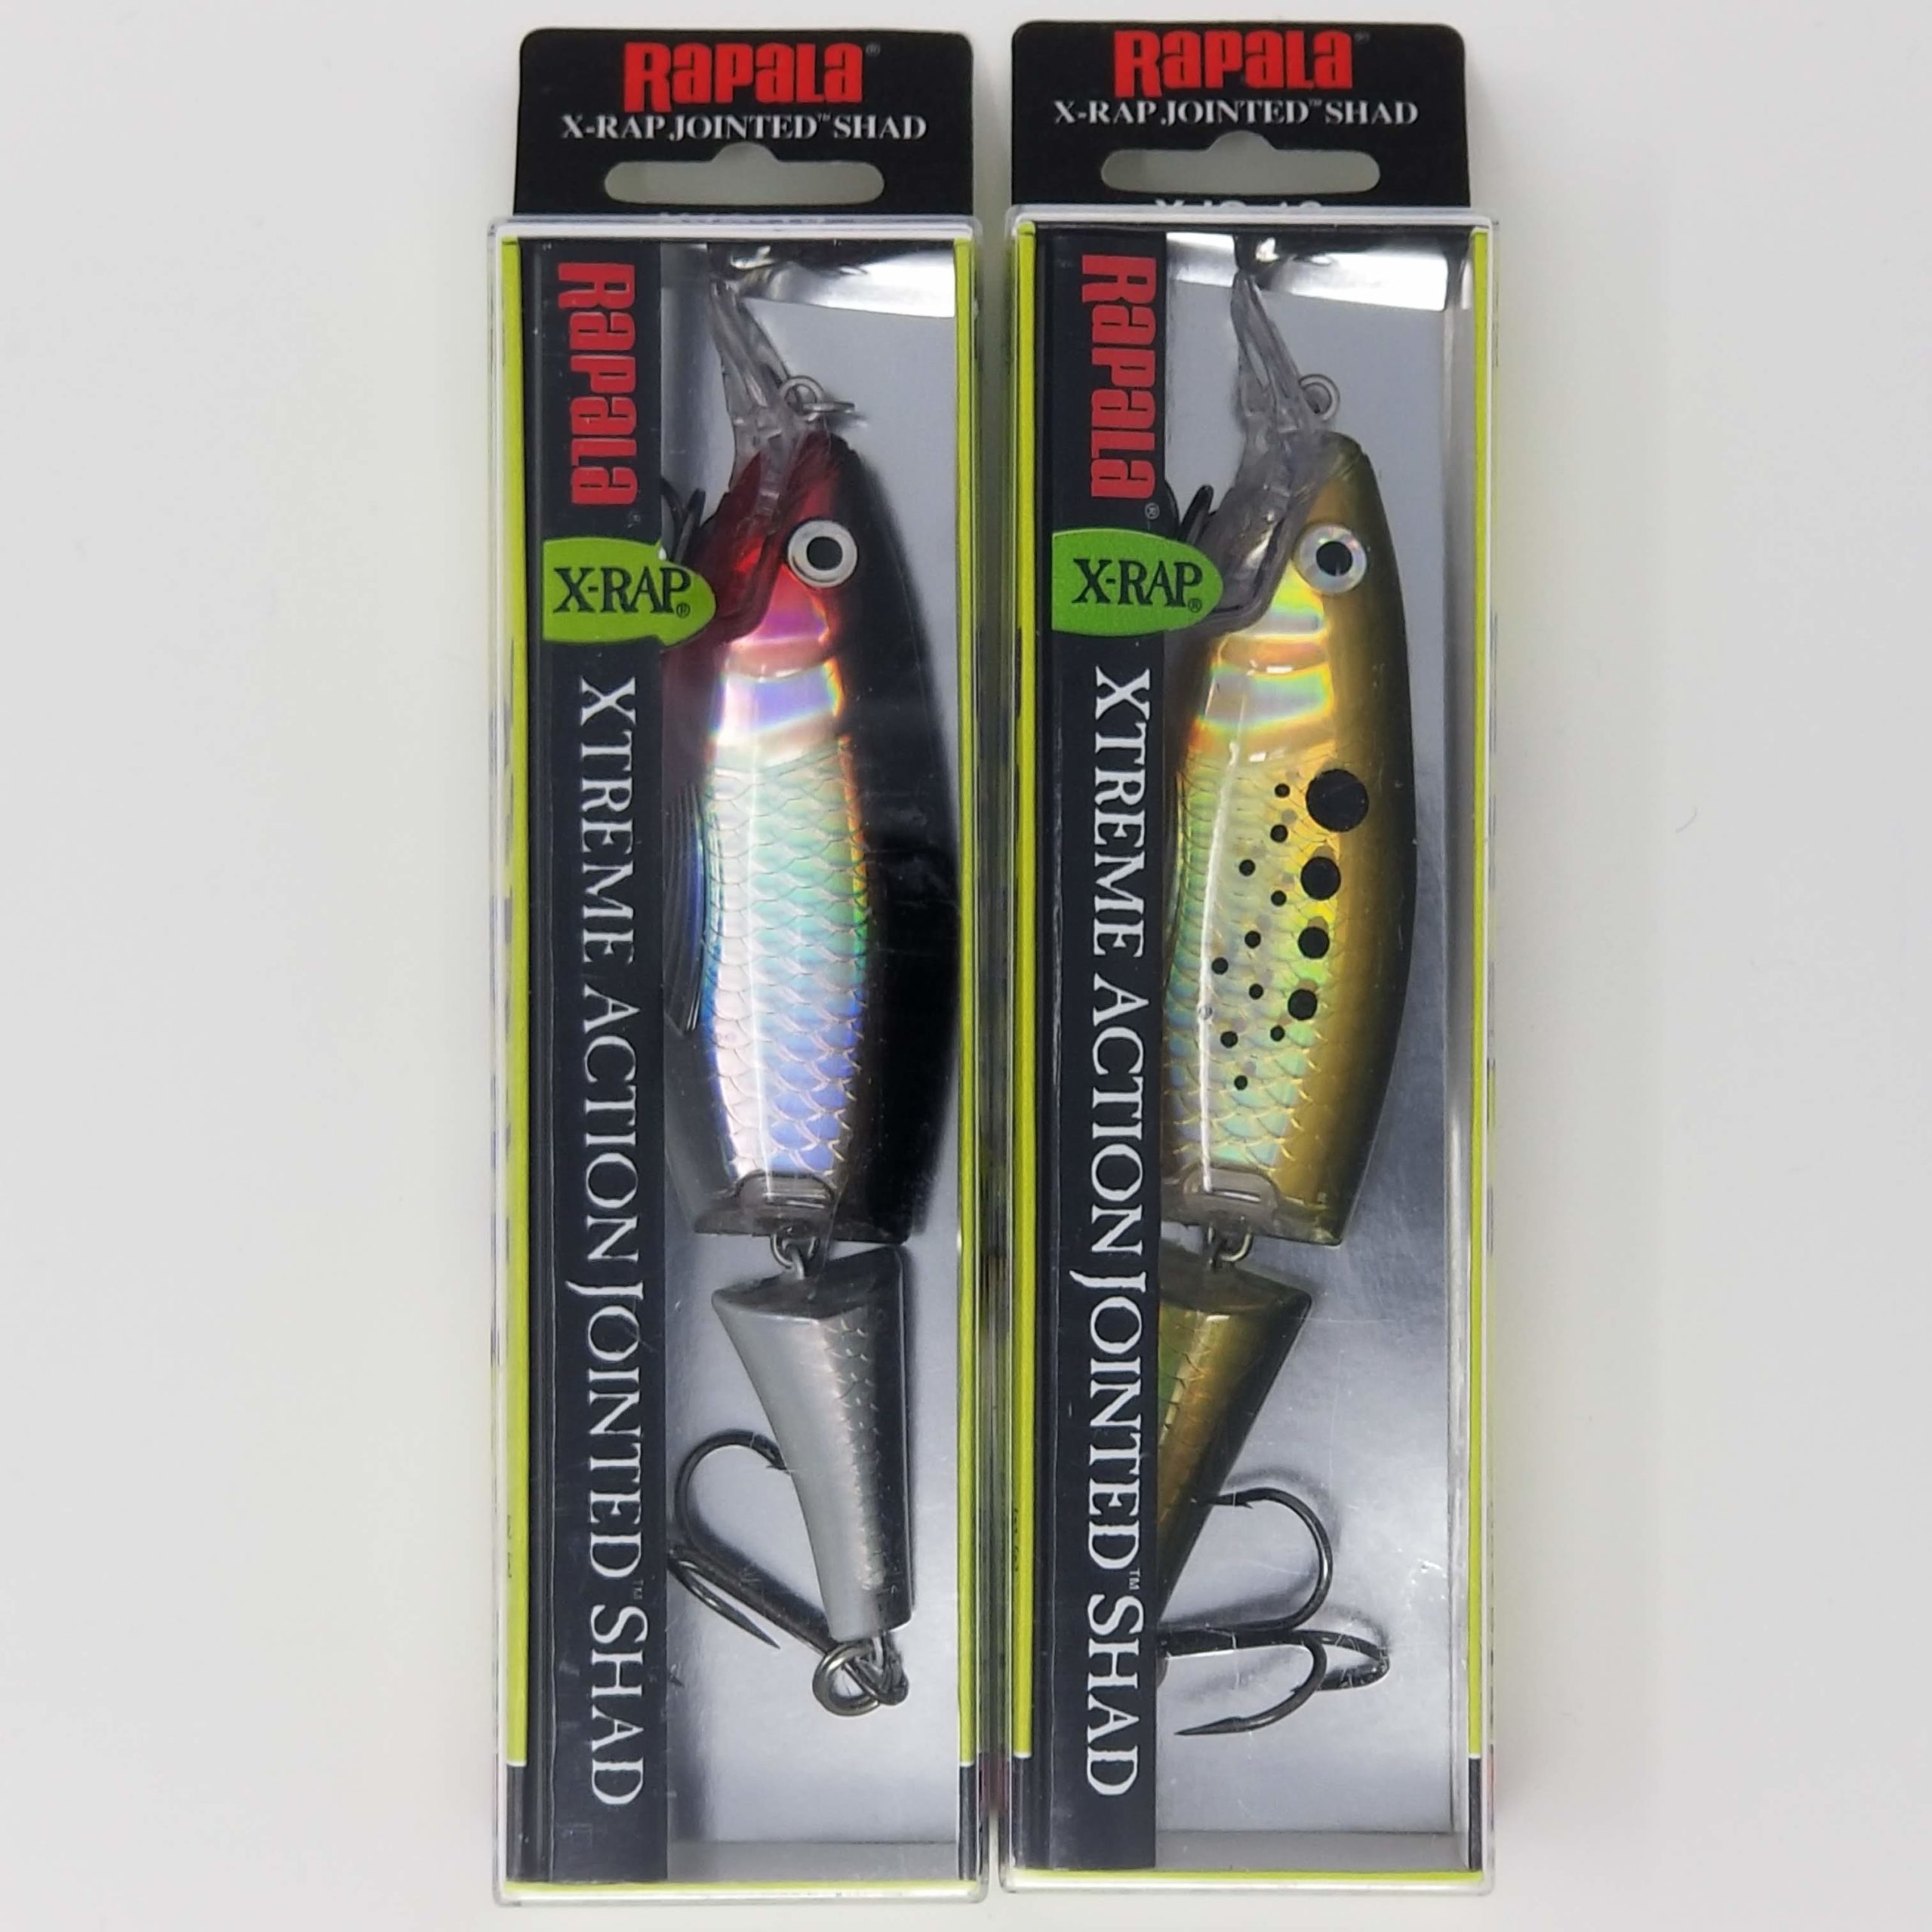 Rapala Saltwater Lures | Fishing Rapala X-Rap Jointed Shad ⋆ Doctasalud